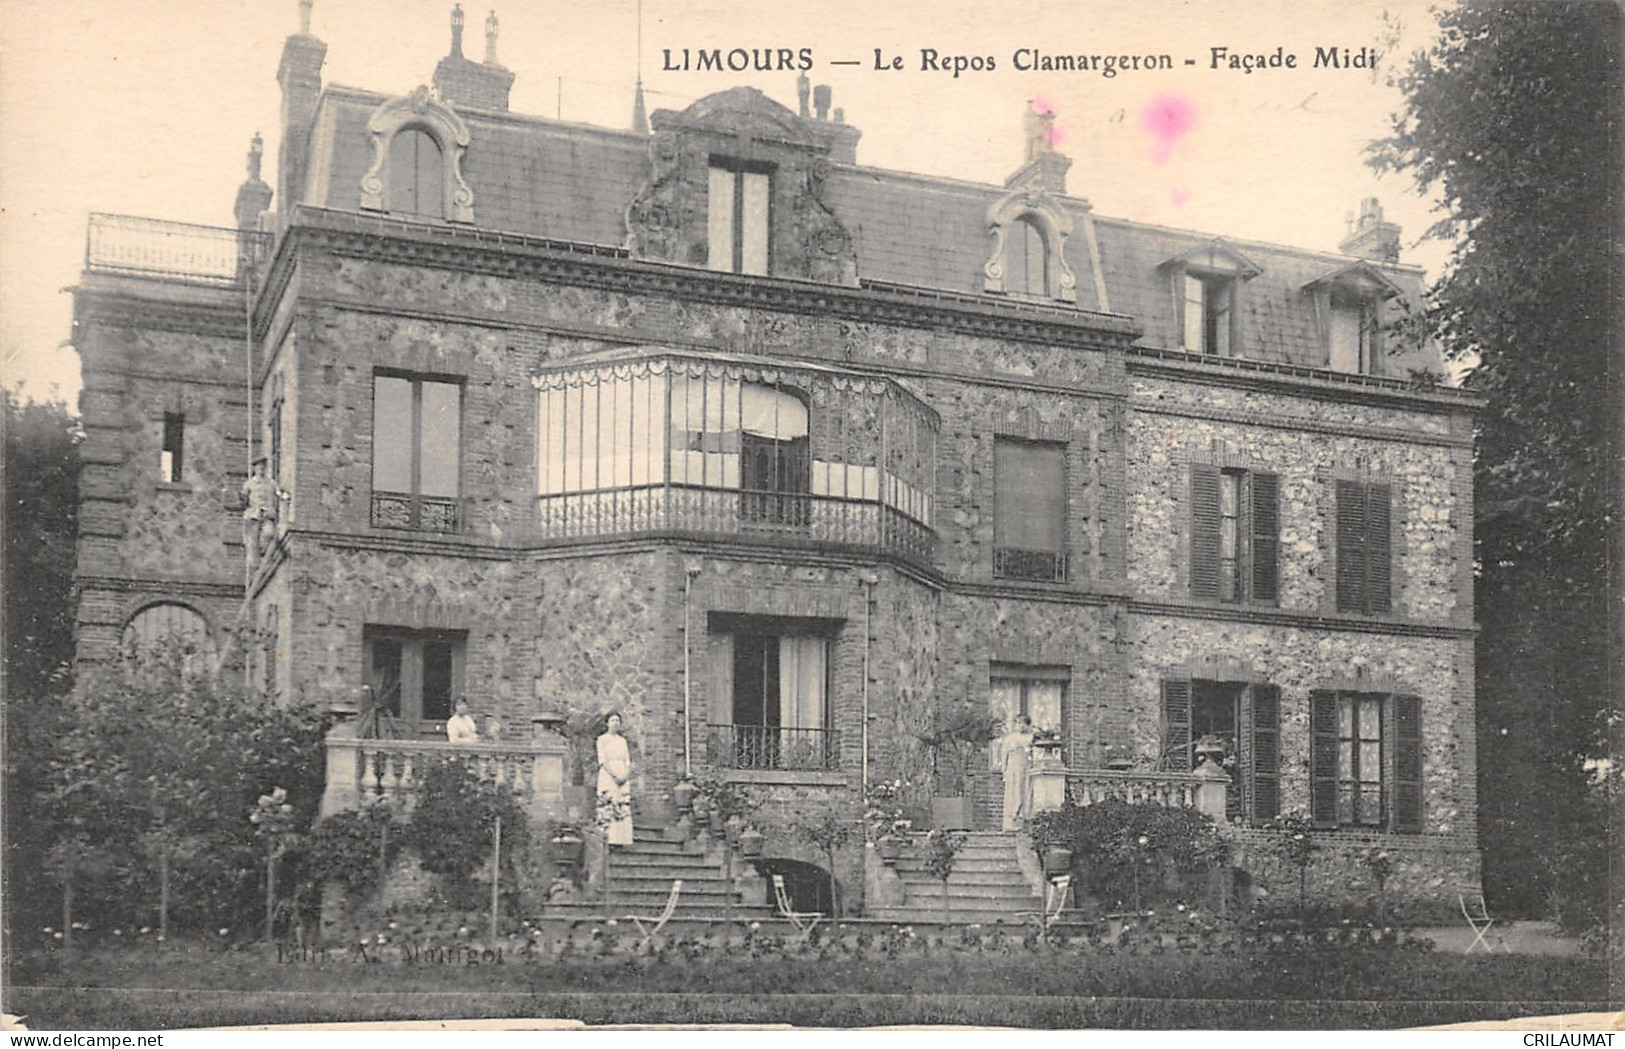 91-LIMOURS-REPOS CLAMARGERAN-N°6025-D/0103 - Limours